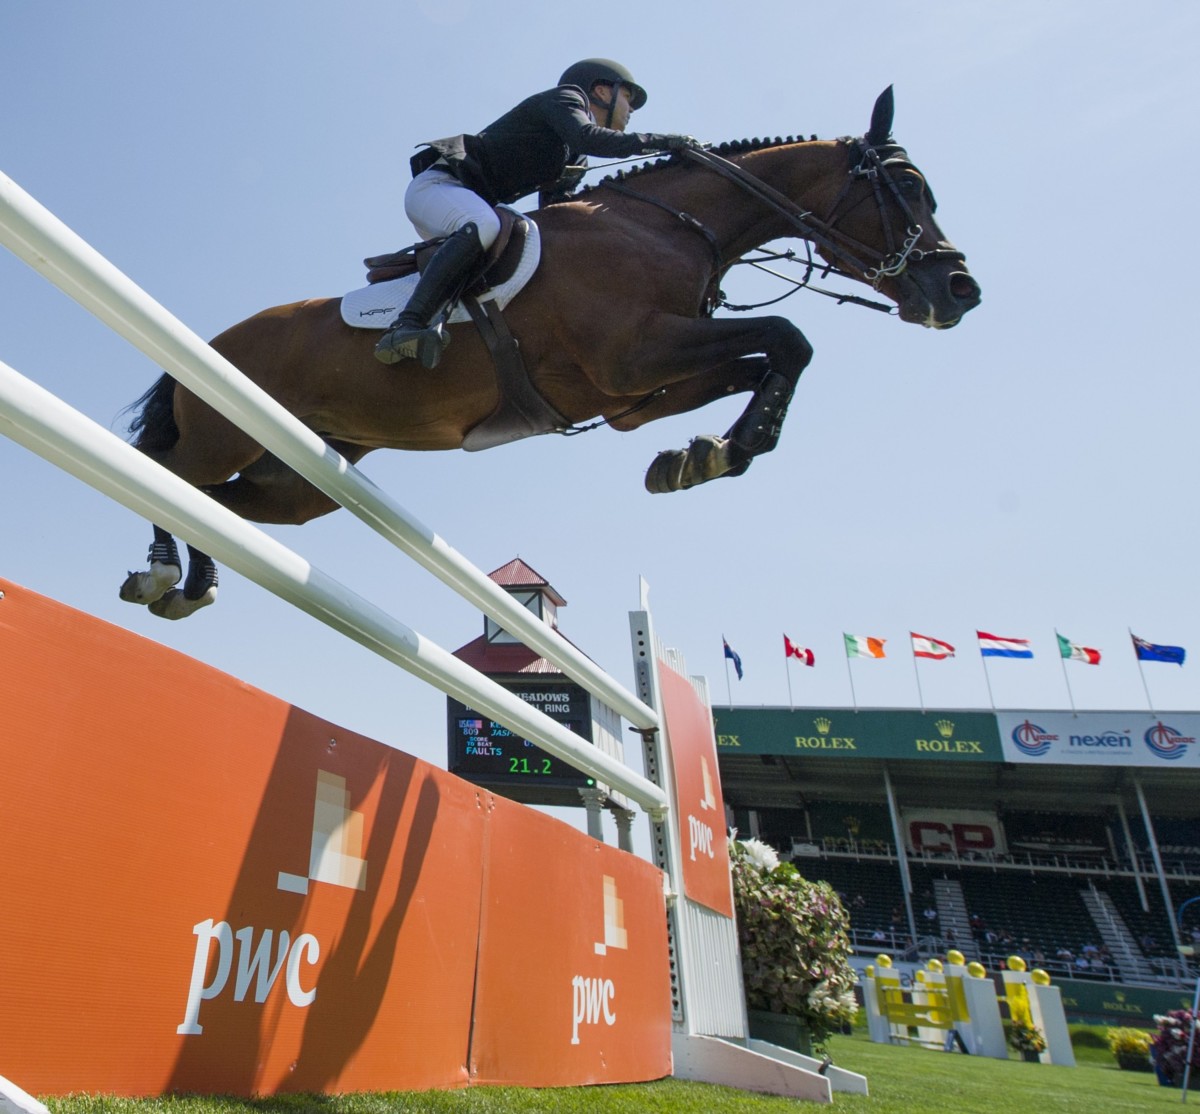 Daniel Coyle on top at Spruce Meadows while Kent Farrington claimes the stage(s).